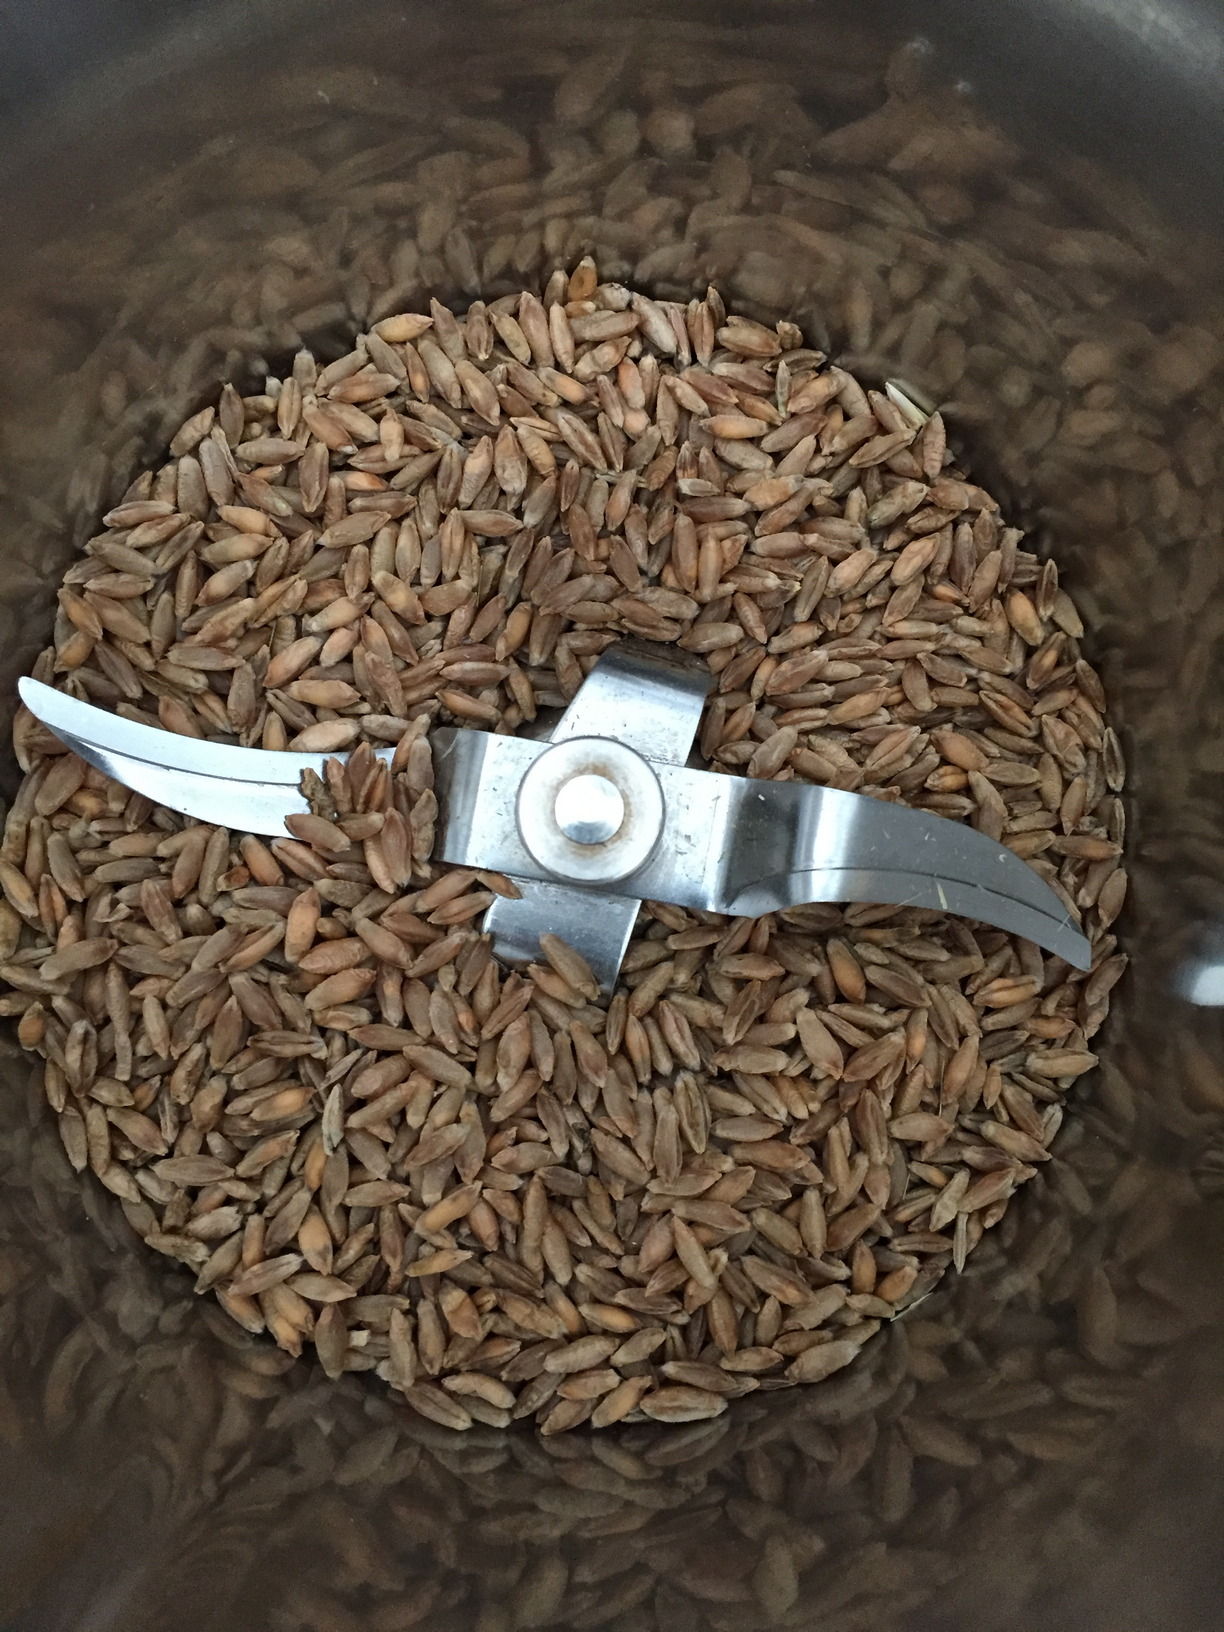 The wheat in the Thermomix.